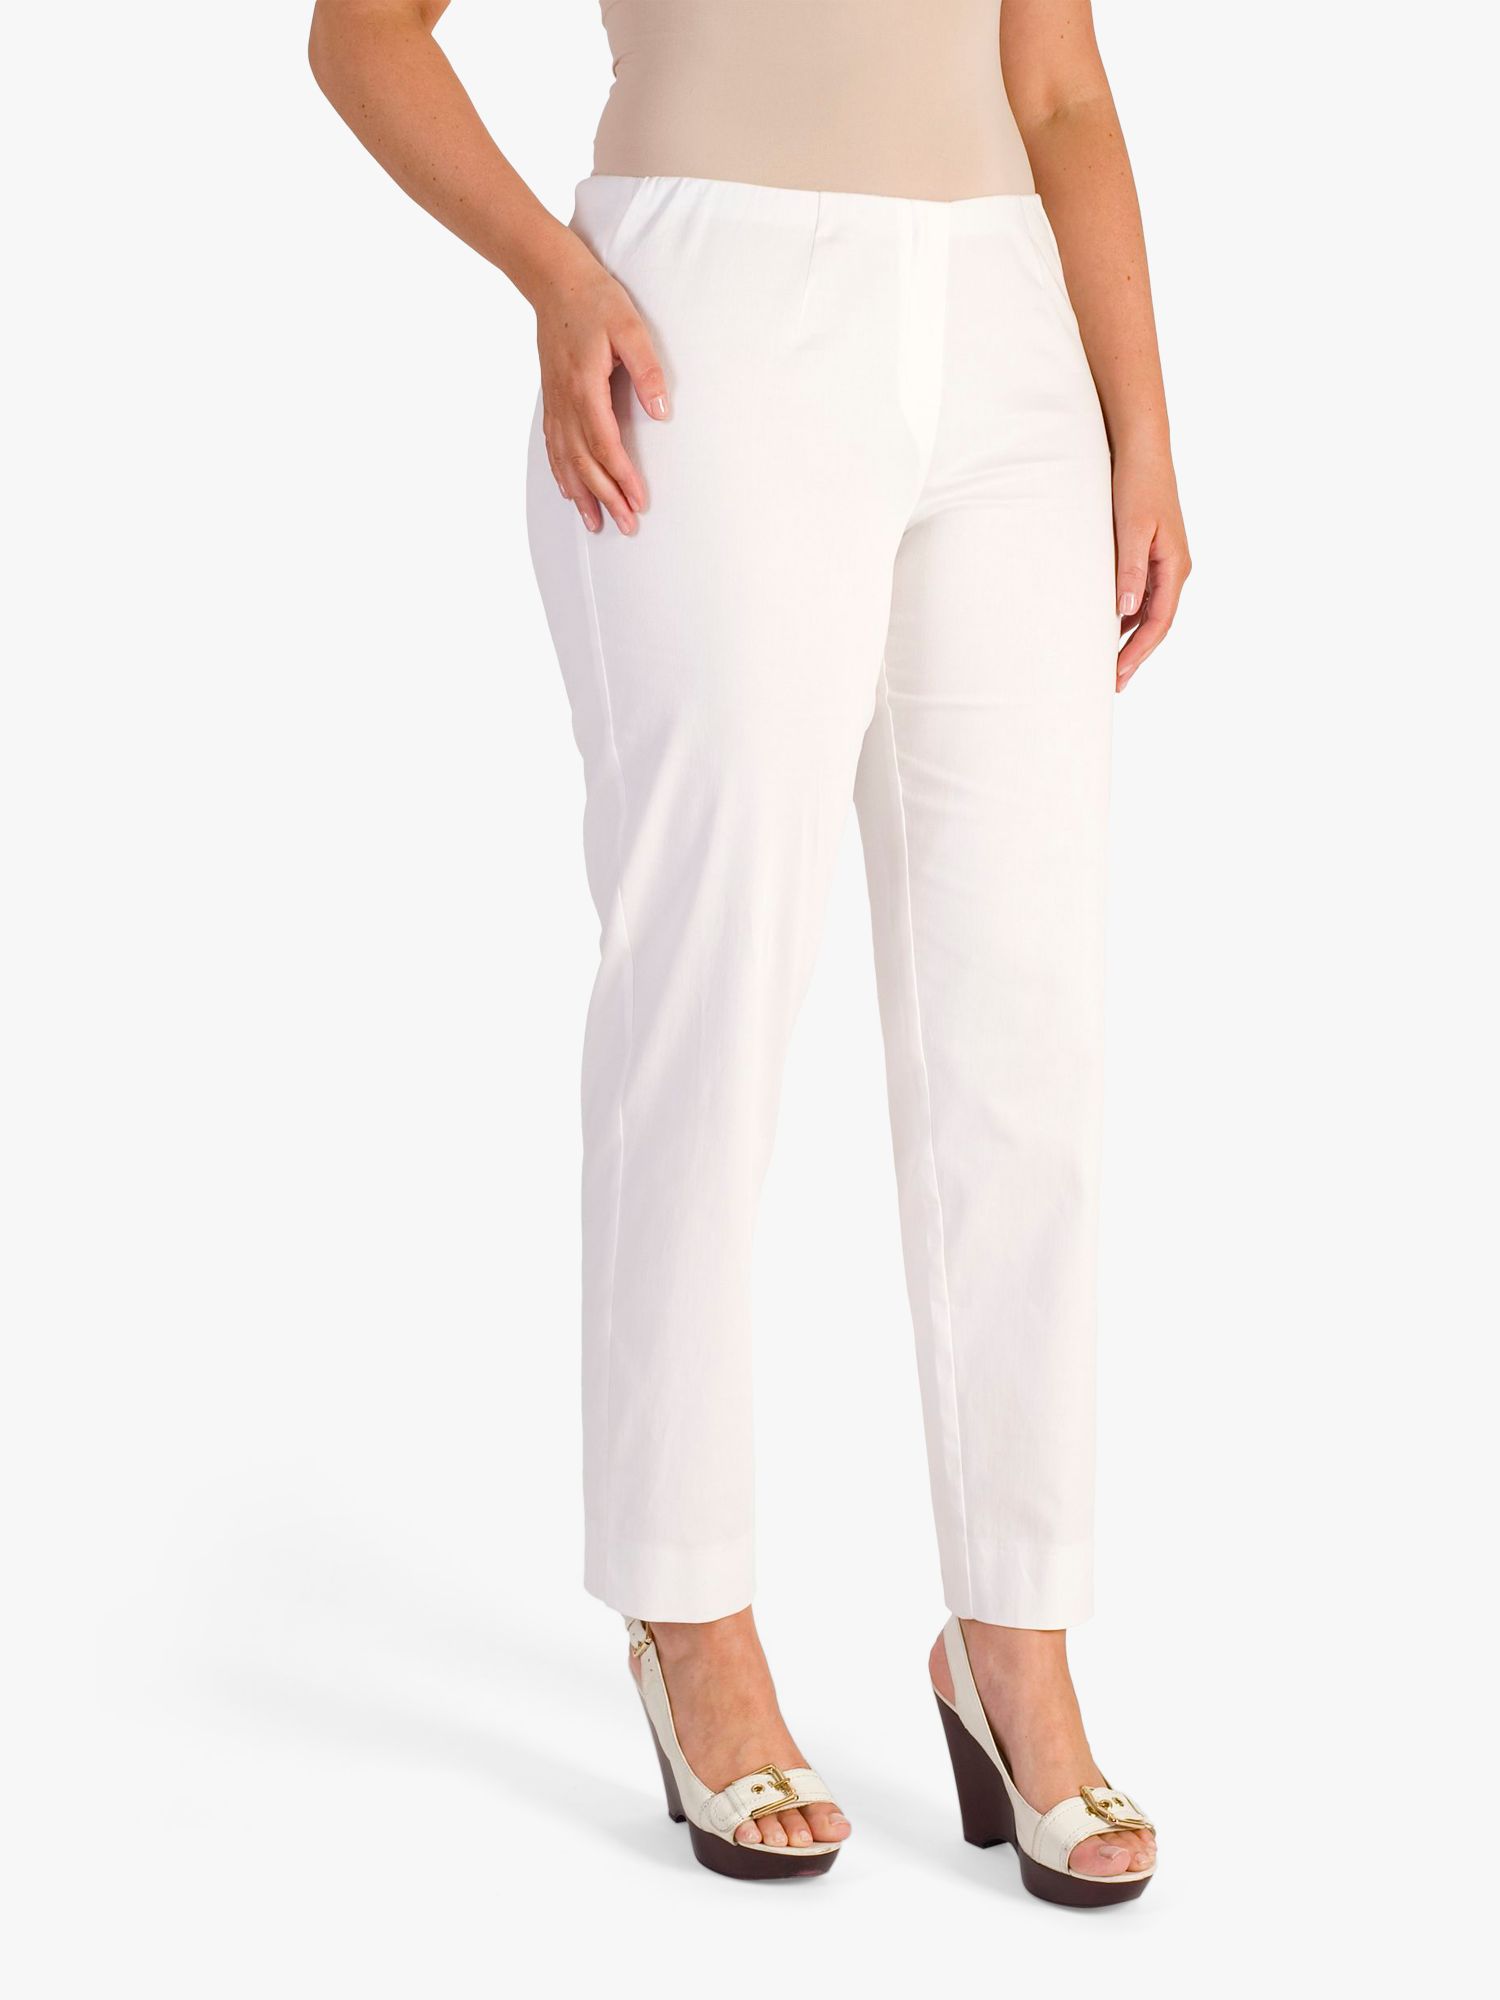 chesca Stretch Cotton Trousers, White at John Lewis & Partners